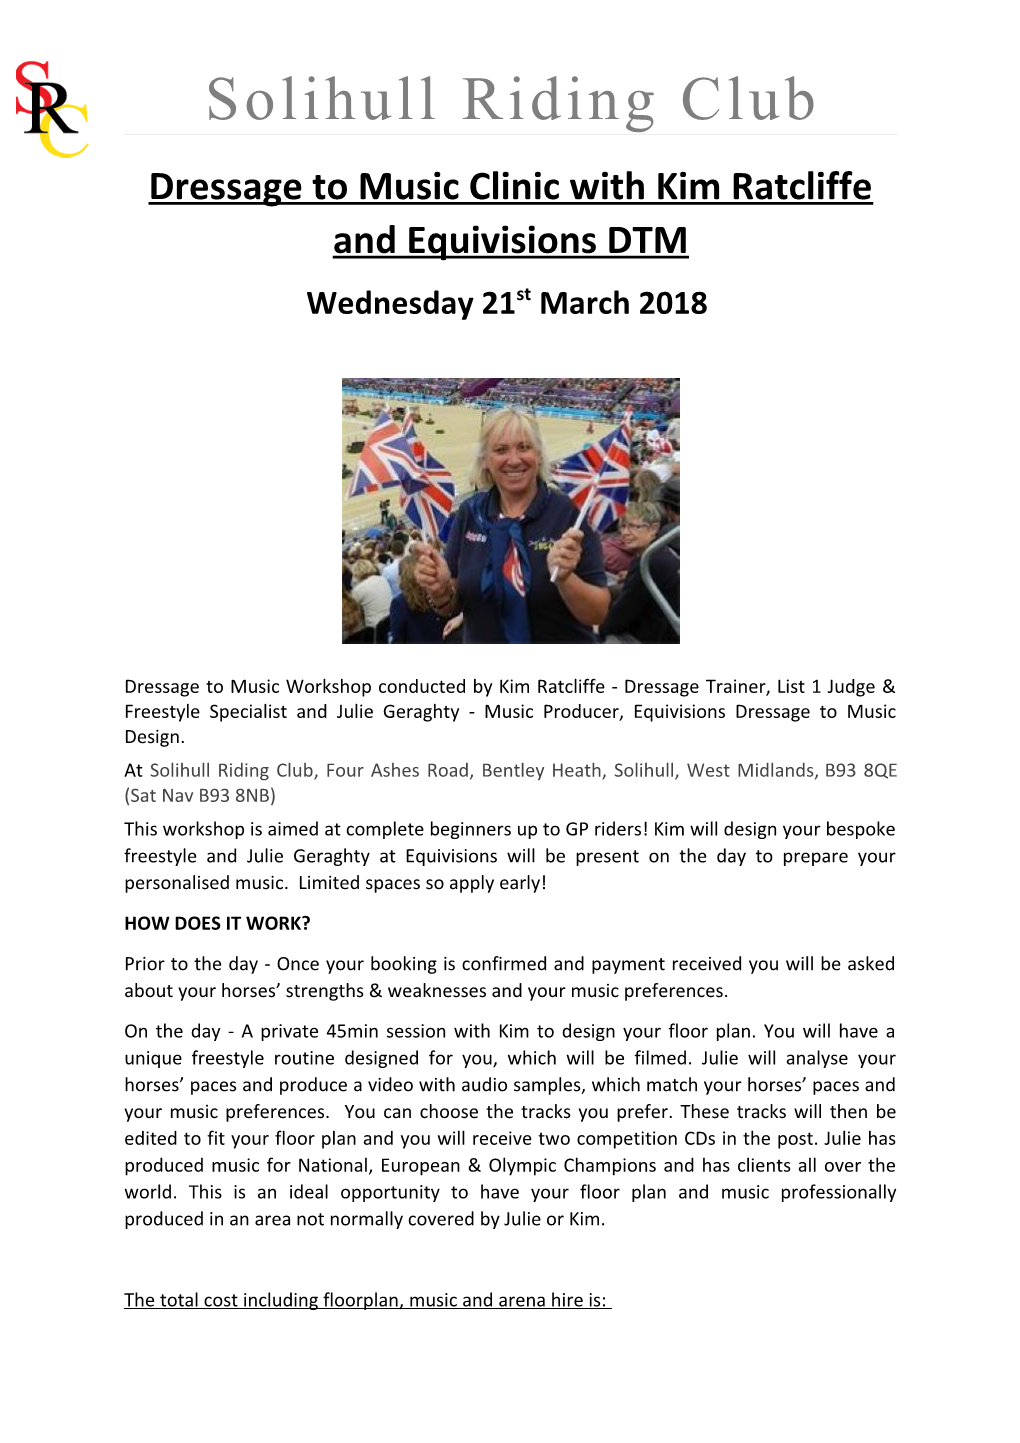 Dressage to Music Clinic with Kim Ratcliffe and Equivisions DTM